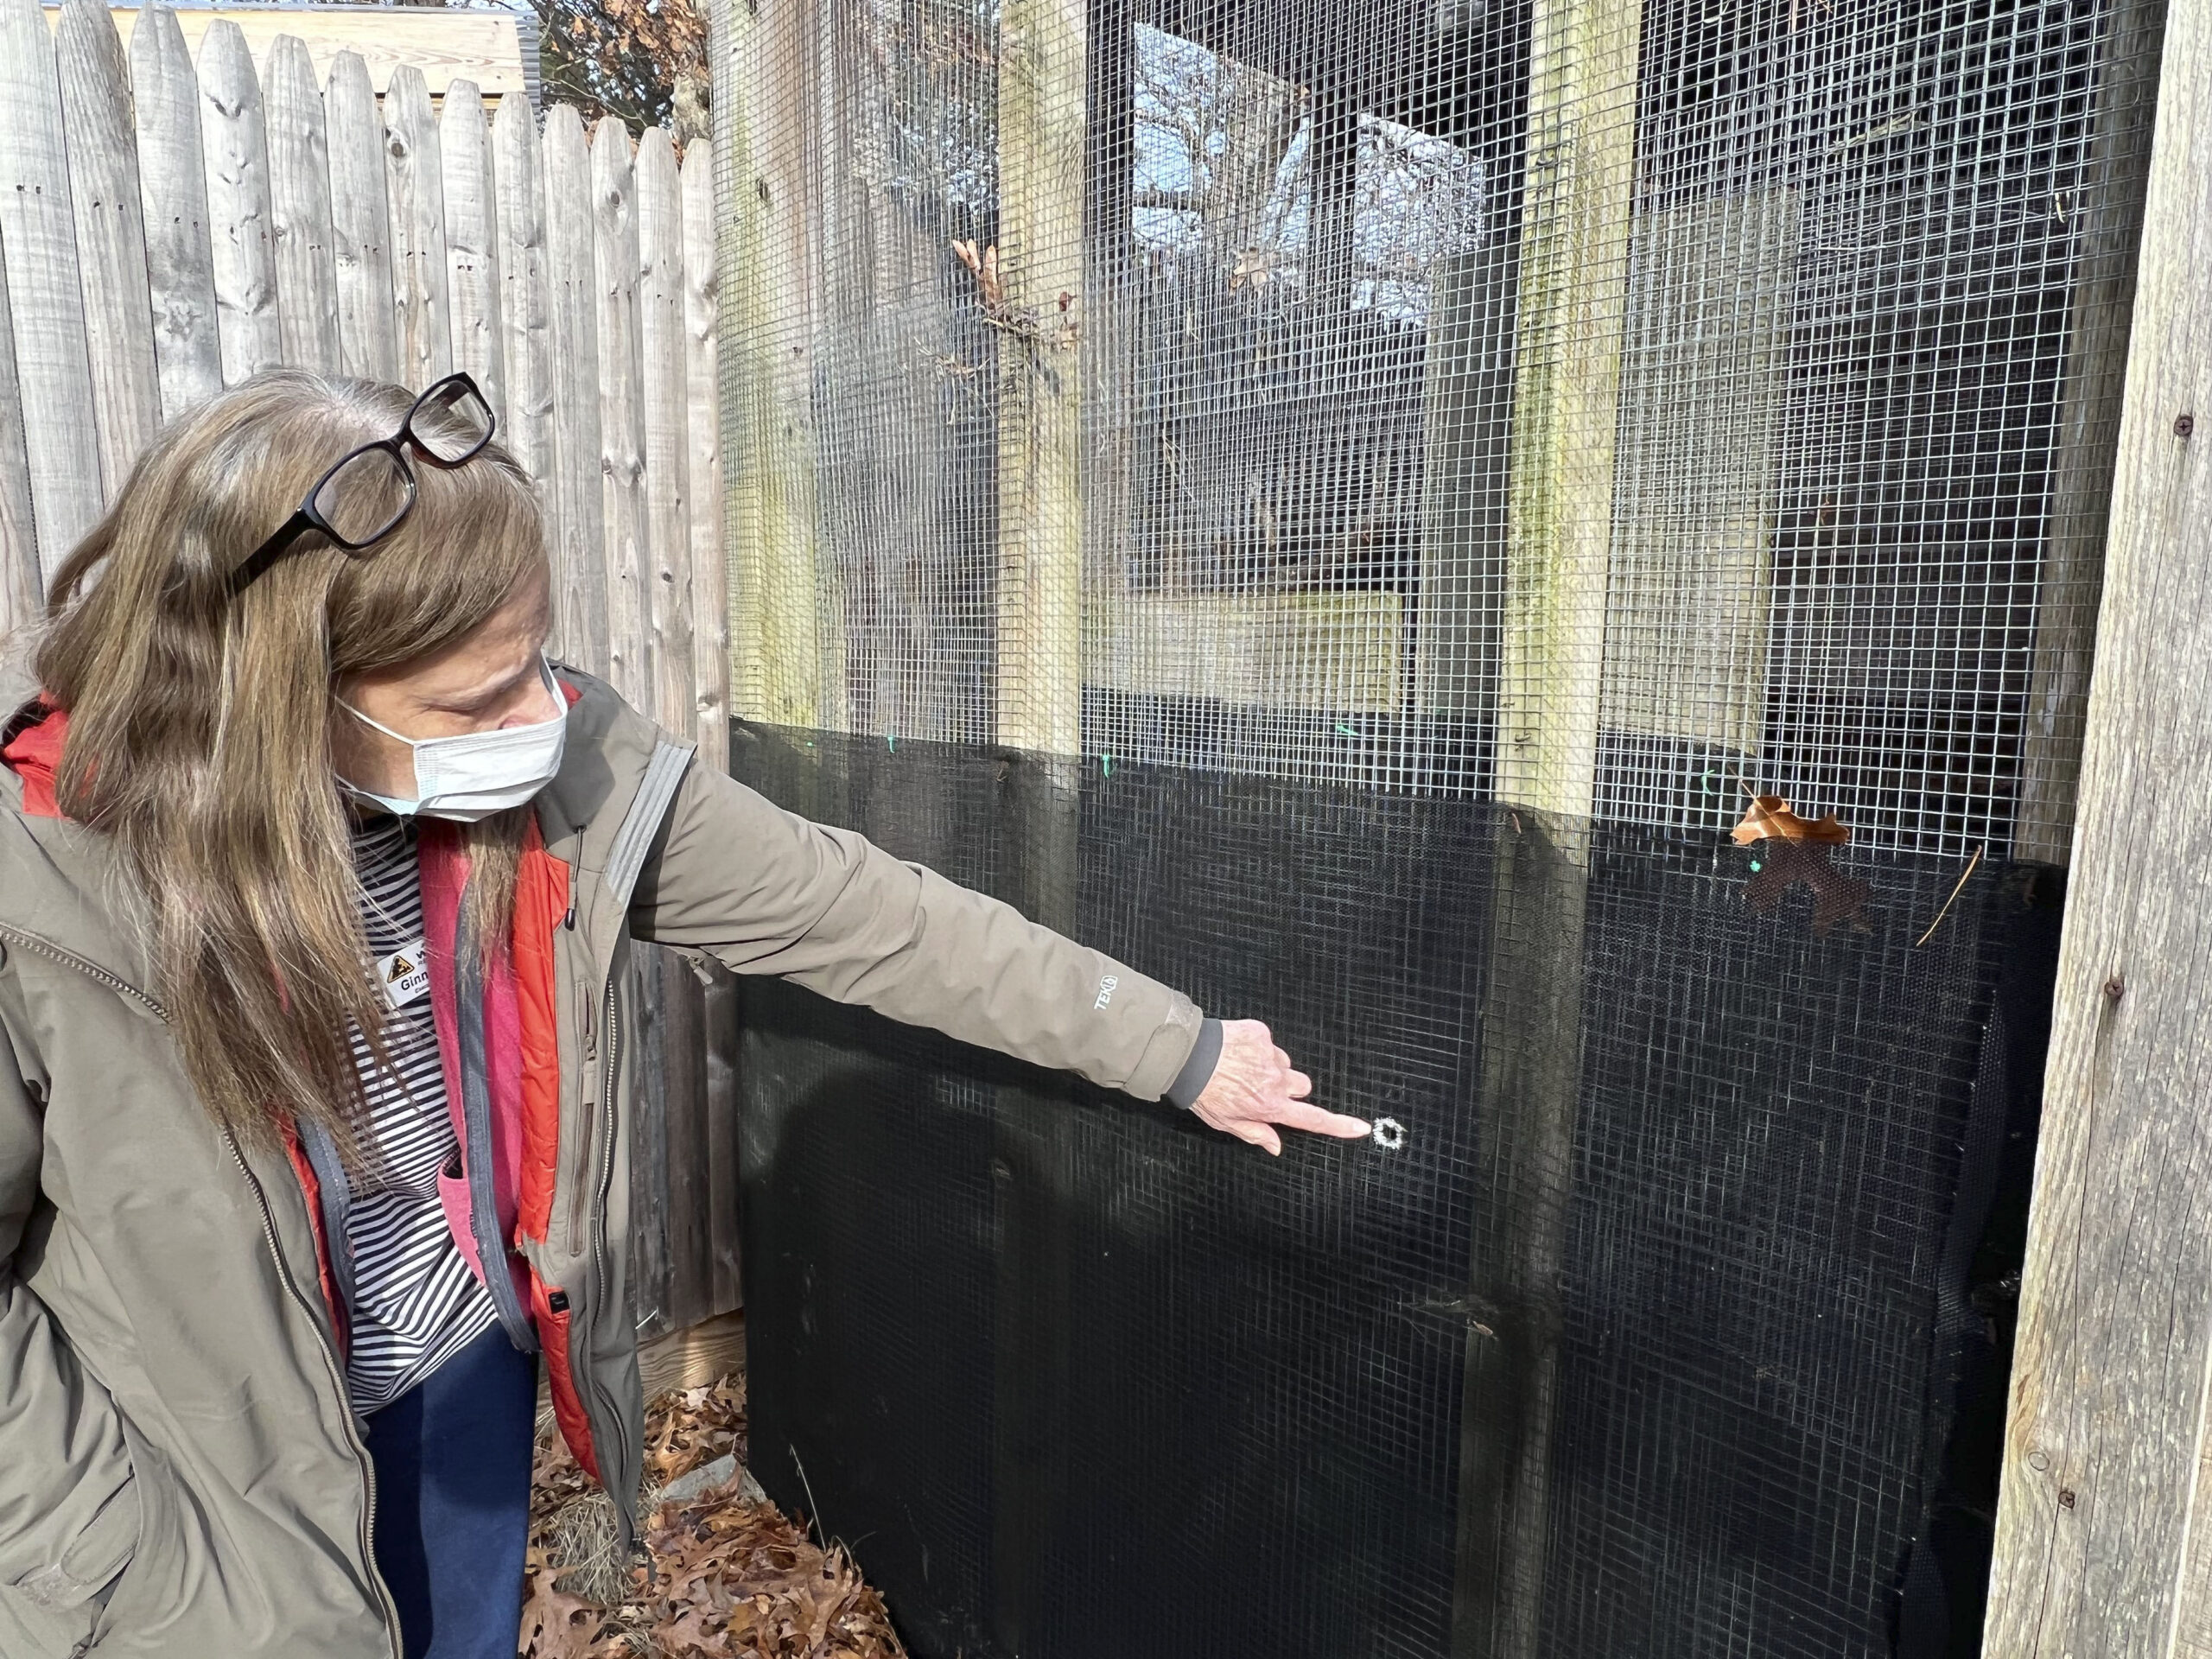 Evelyn Alexander Wildlife Rescue Center executive director Ginnie Frati pointed out bullet holes in an enclosure after the January shooting.    DANA SHAW